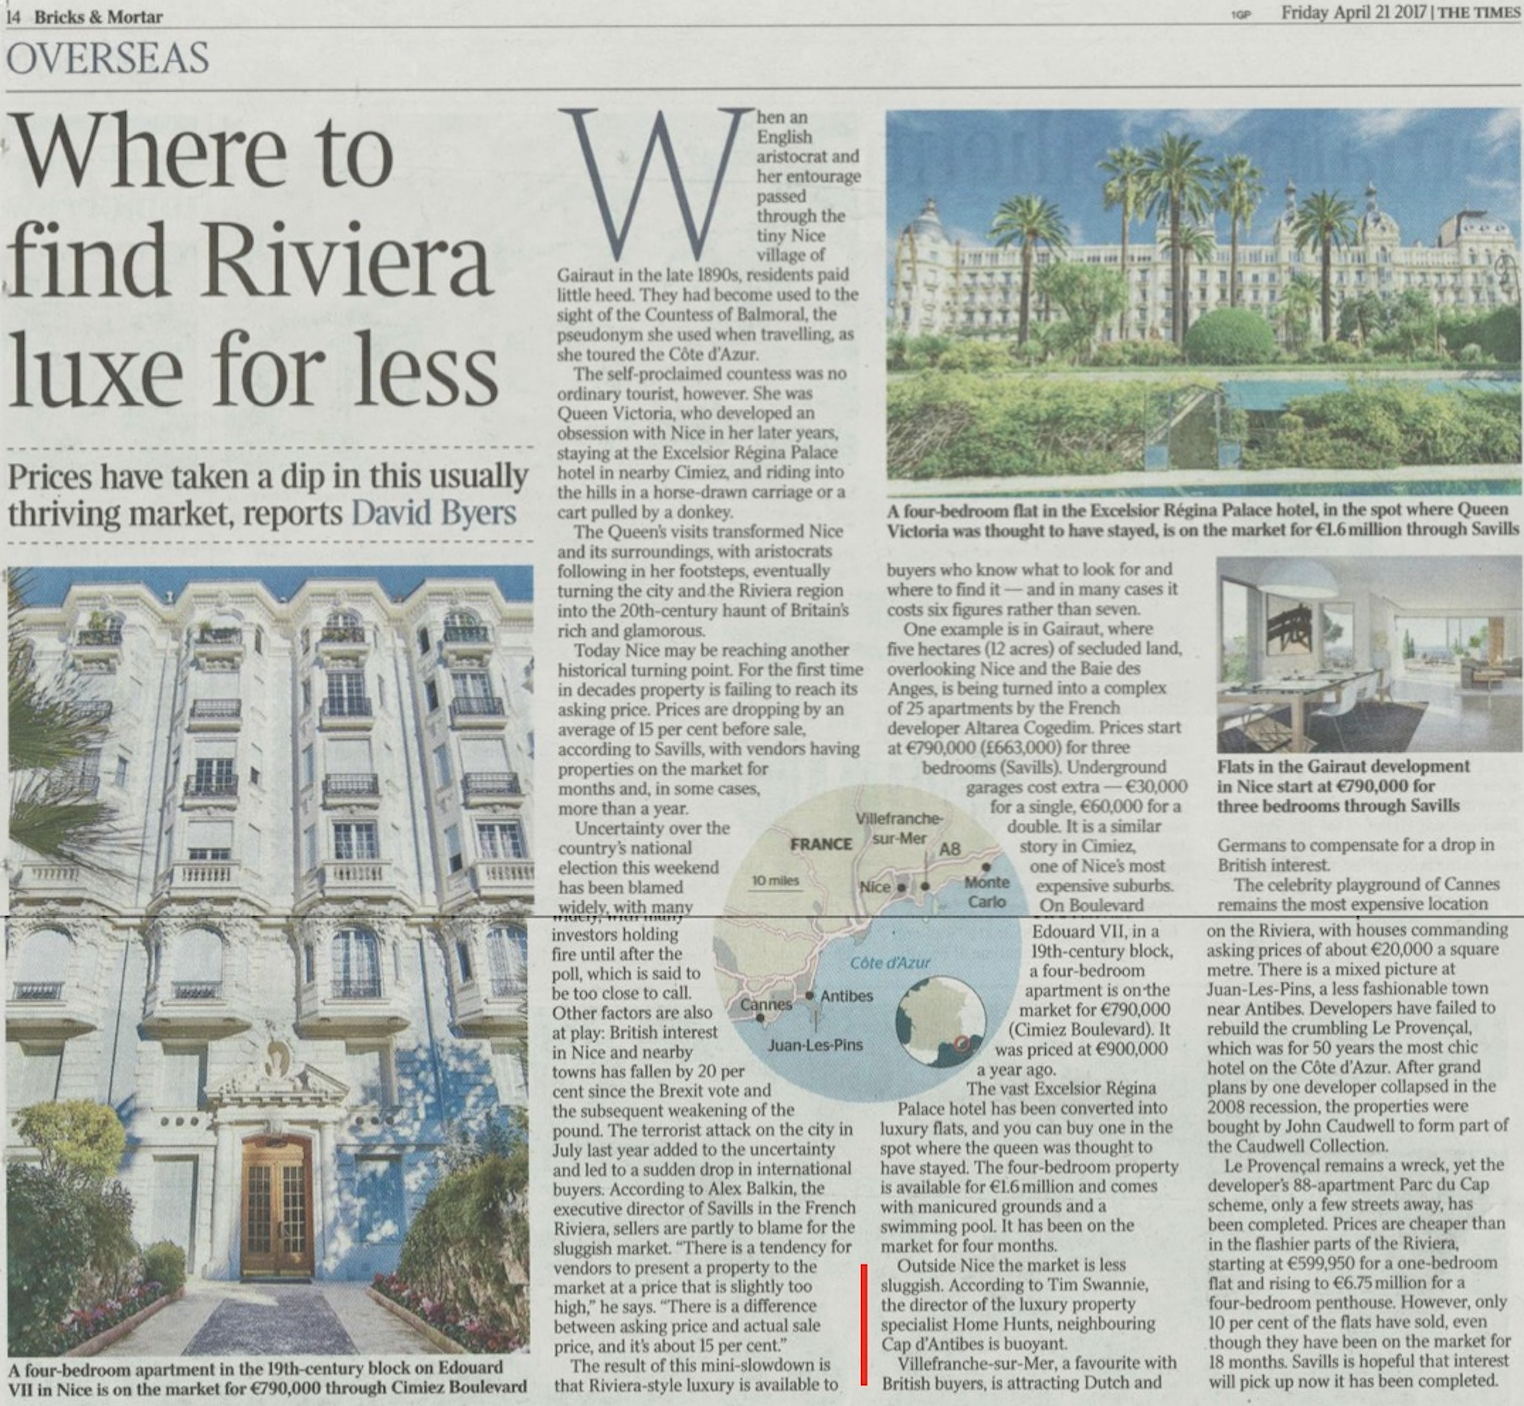 The Times – Where to buy luxury Riviera property for less